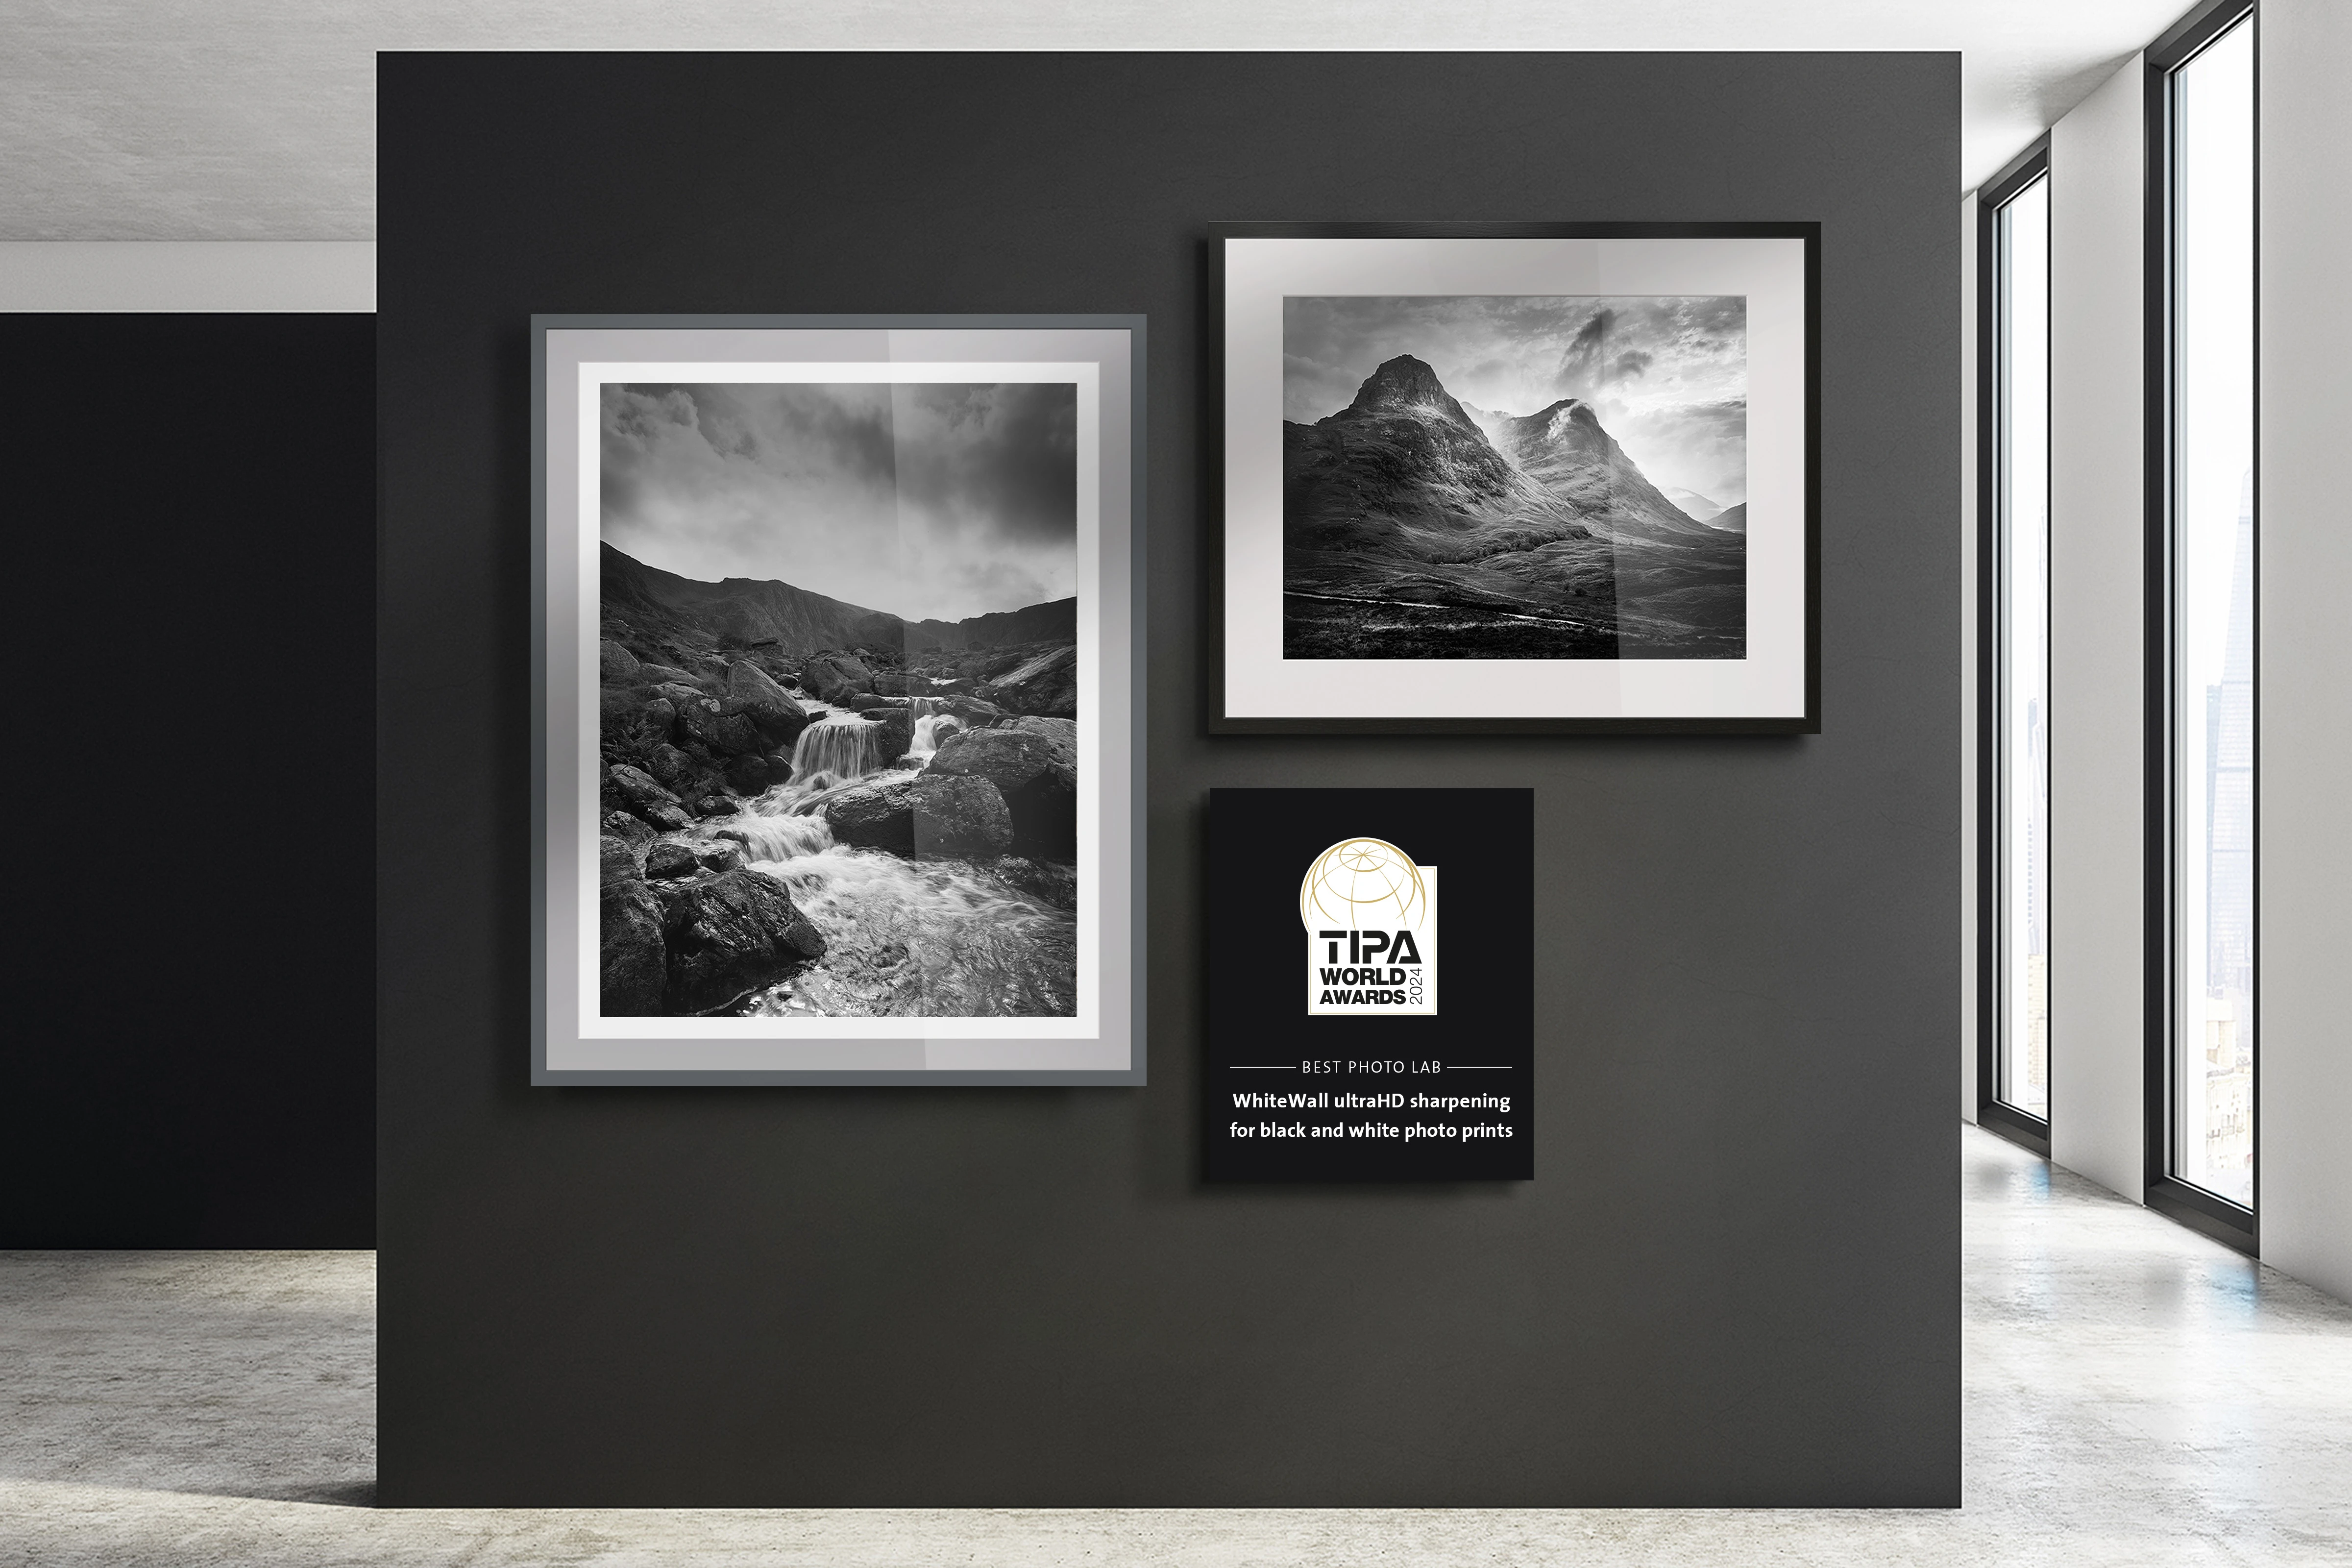 pictures on a wall with black and white motifs